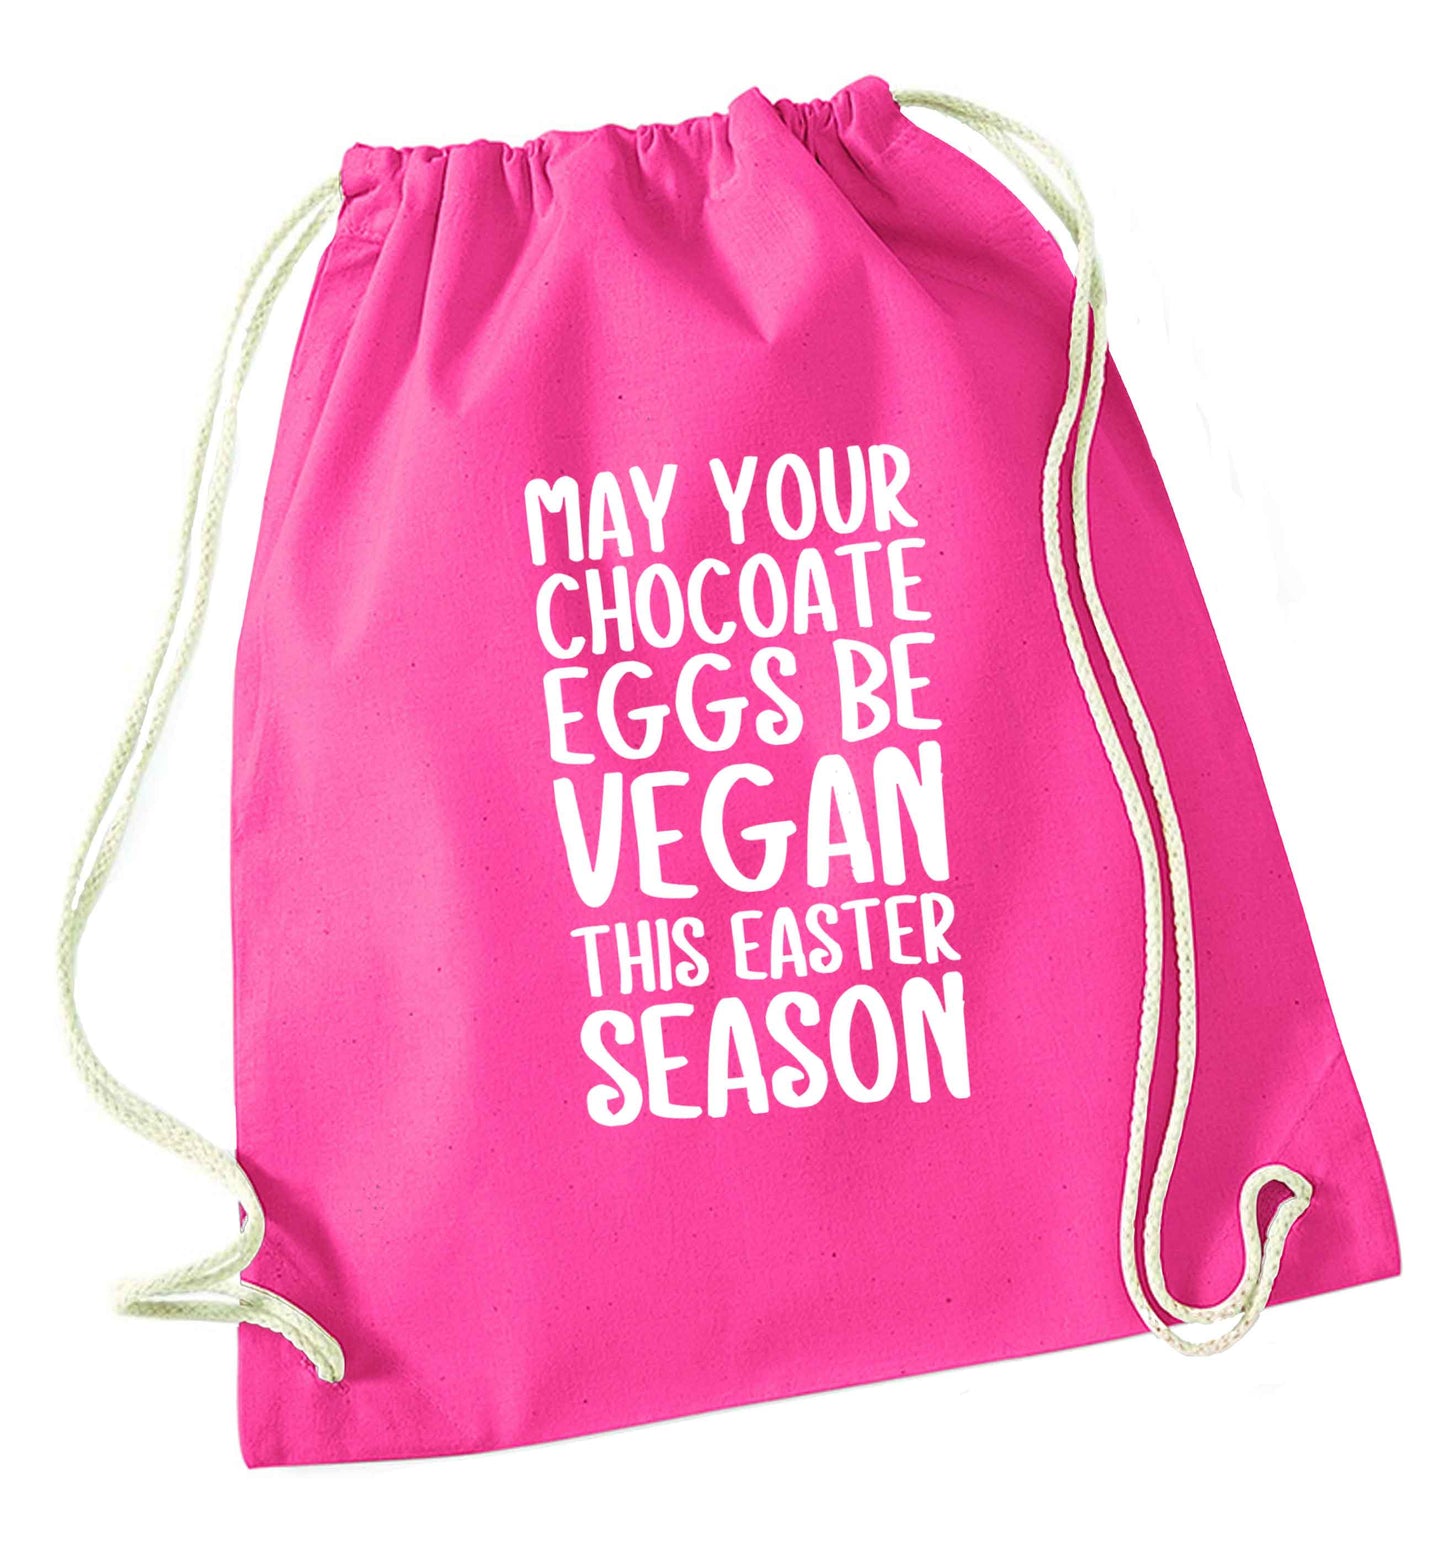 Easter bunny approved! Vegans will love this easter themed pink drawstring bag